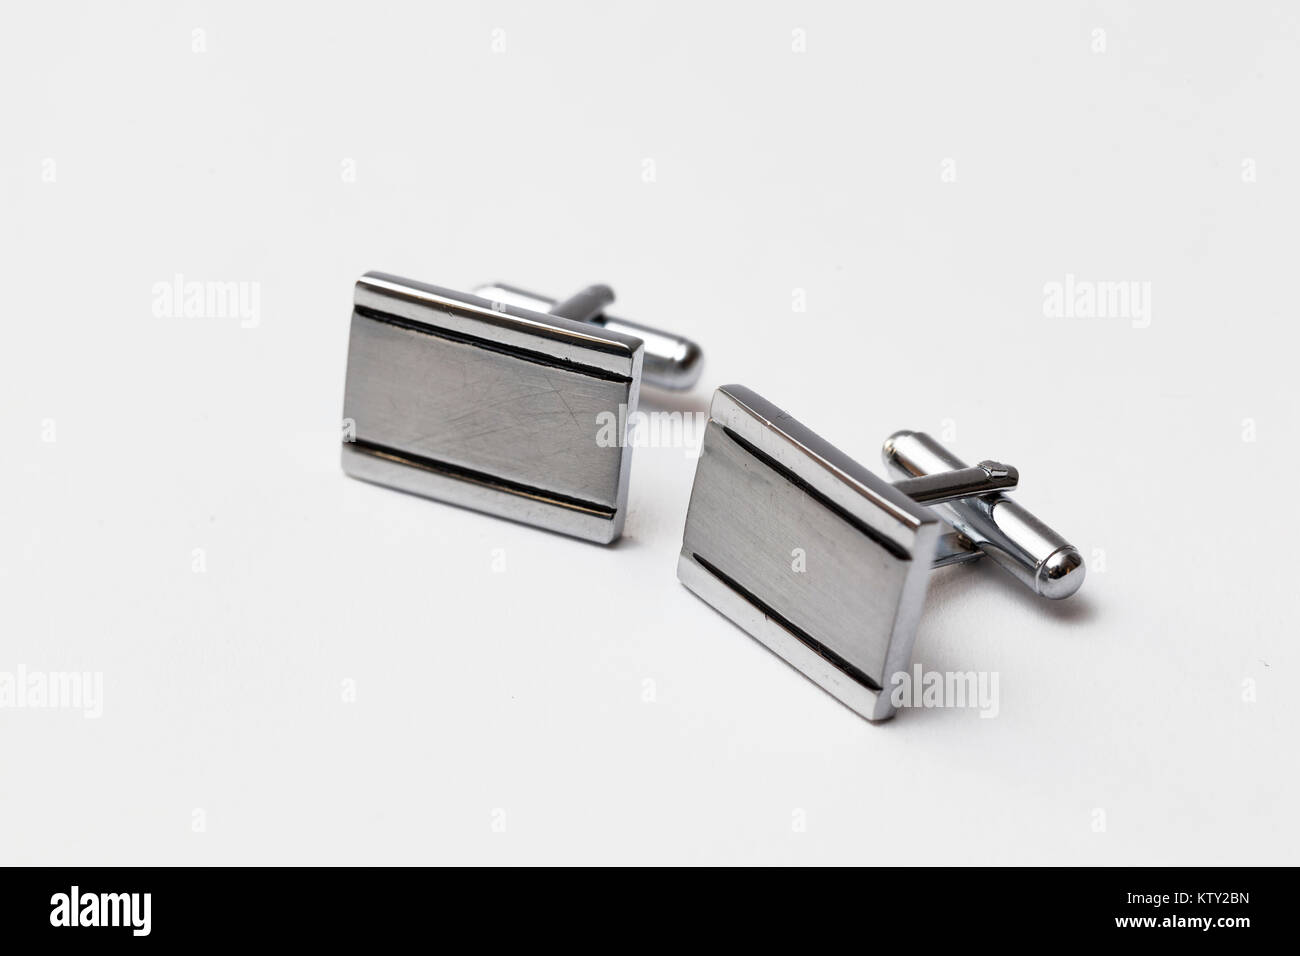 cufflinks silver on white backgrounds, close up Stock Photo